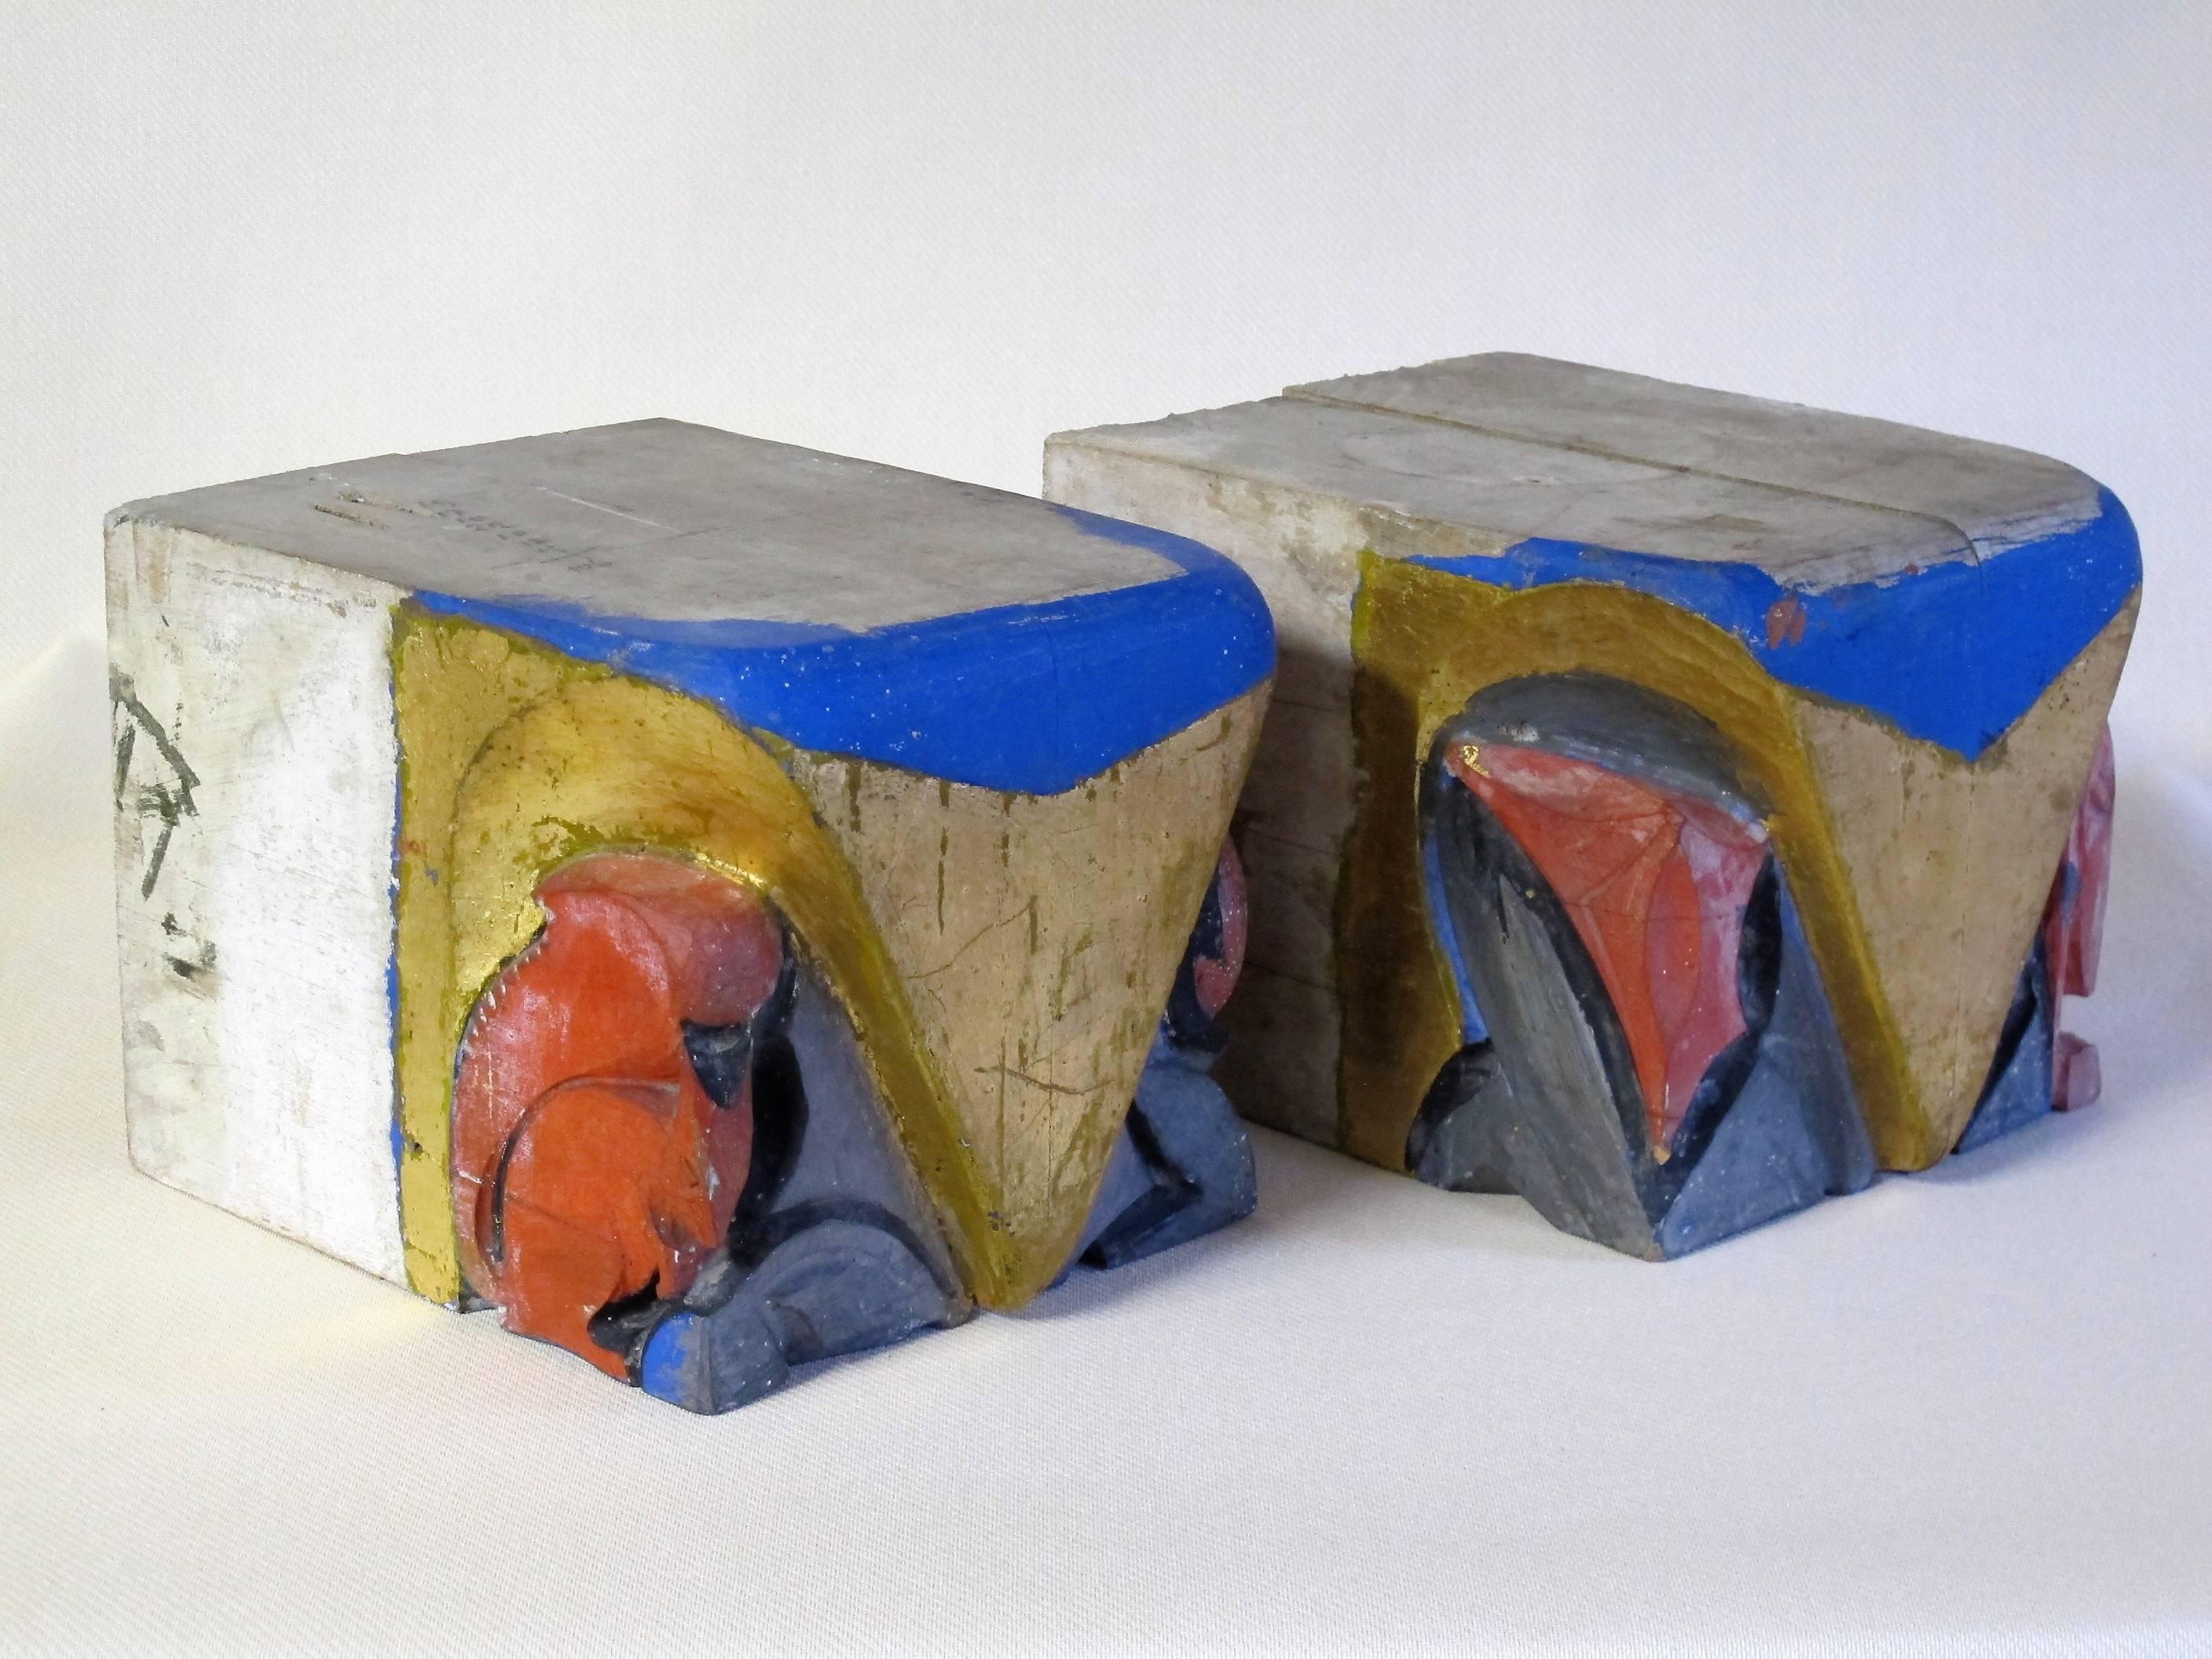 Beautiful polychromed wooden consoles by Dutch sculptor Hildo Krop (1884-1970).
The wooden consoles are carved with a squirrel and a pelican and partly painted with gold, red and blue paint.
These ornaments have similarities with the ceramics